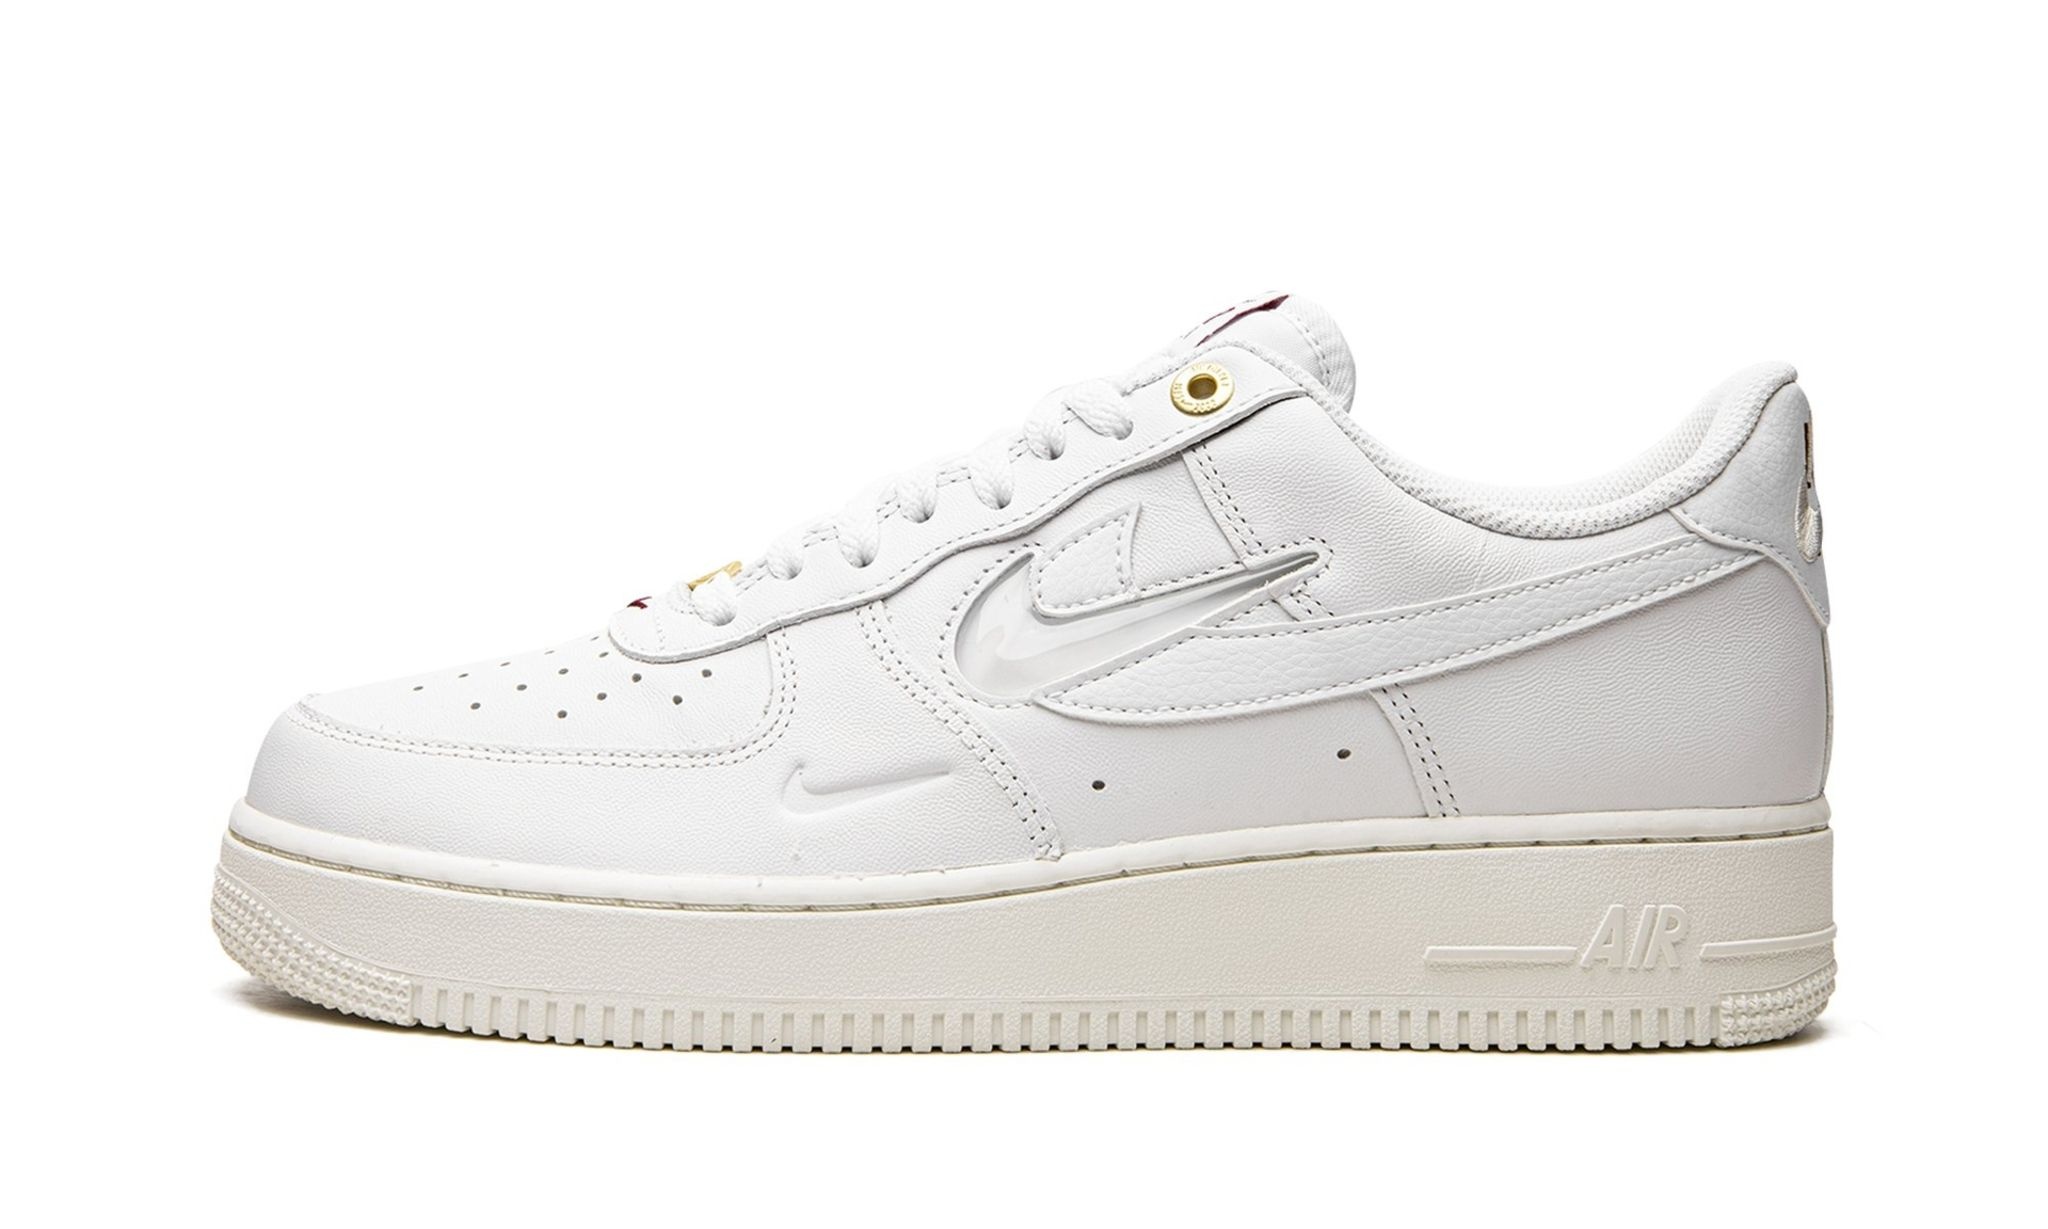 Air Force 1 Low '07 LV8 "Join Forces Sail" - 1